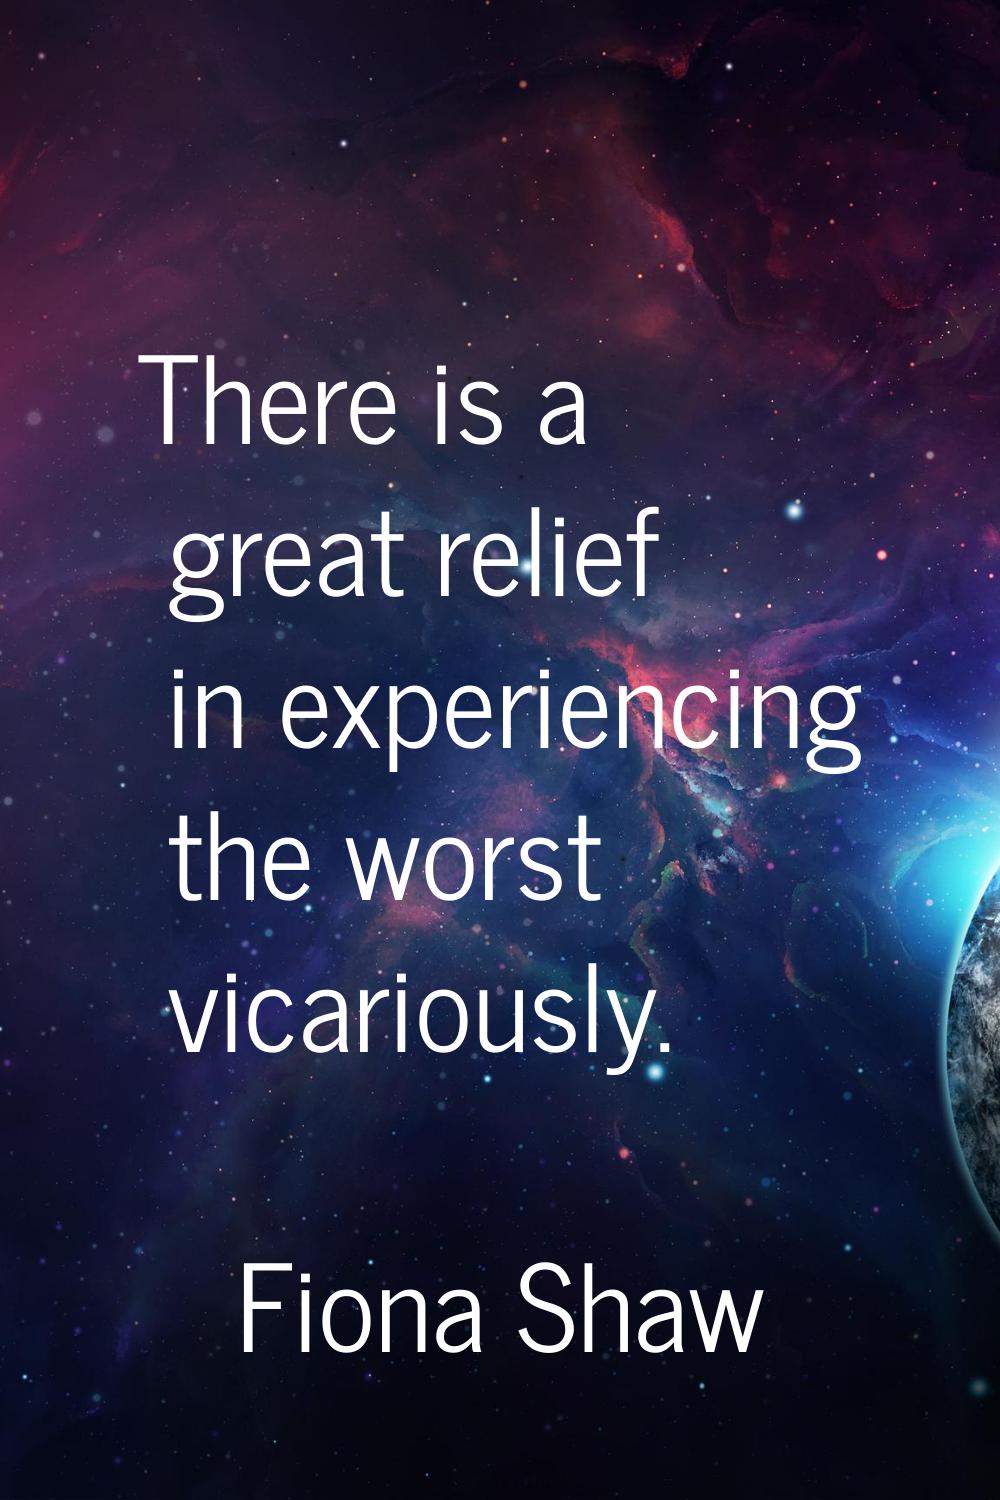 There is a great relief in experiencing the worst vicariously.